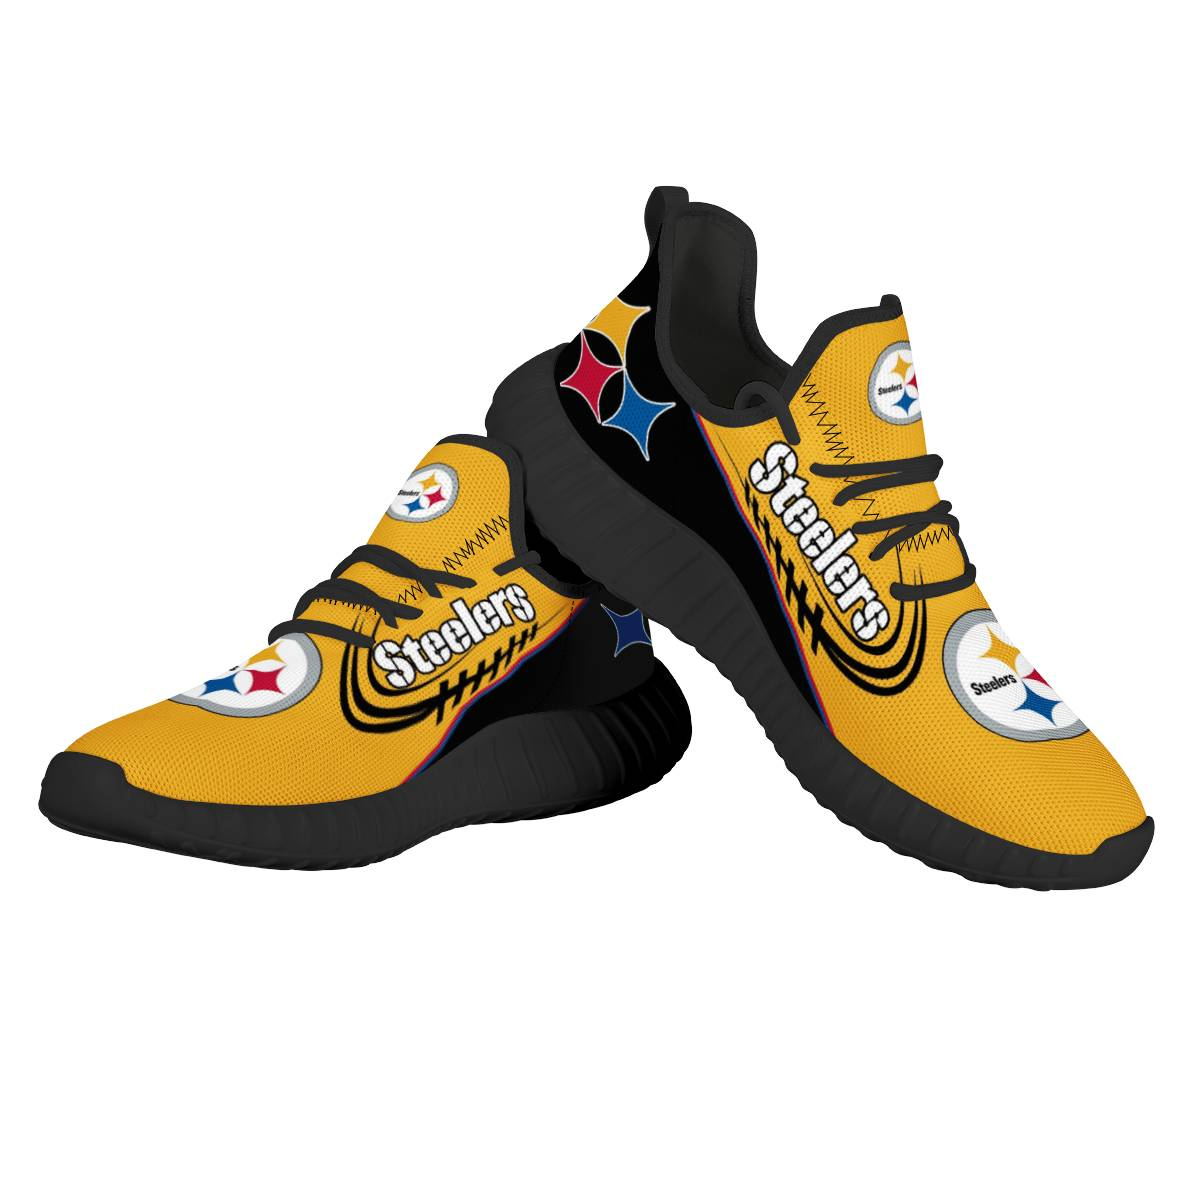 Women's NFL Pittsburgh Steelers Mesh Knit Sneakers/Shoes 004